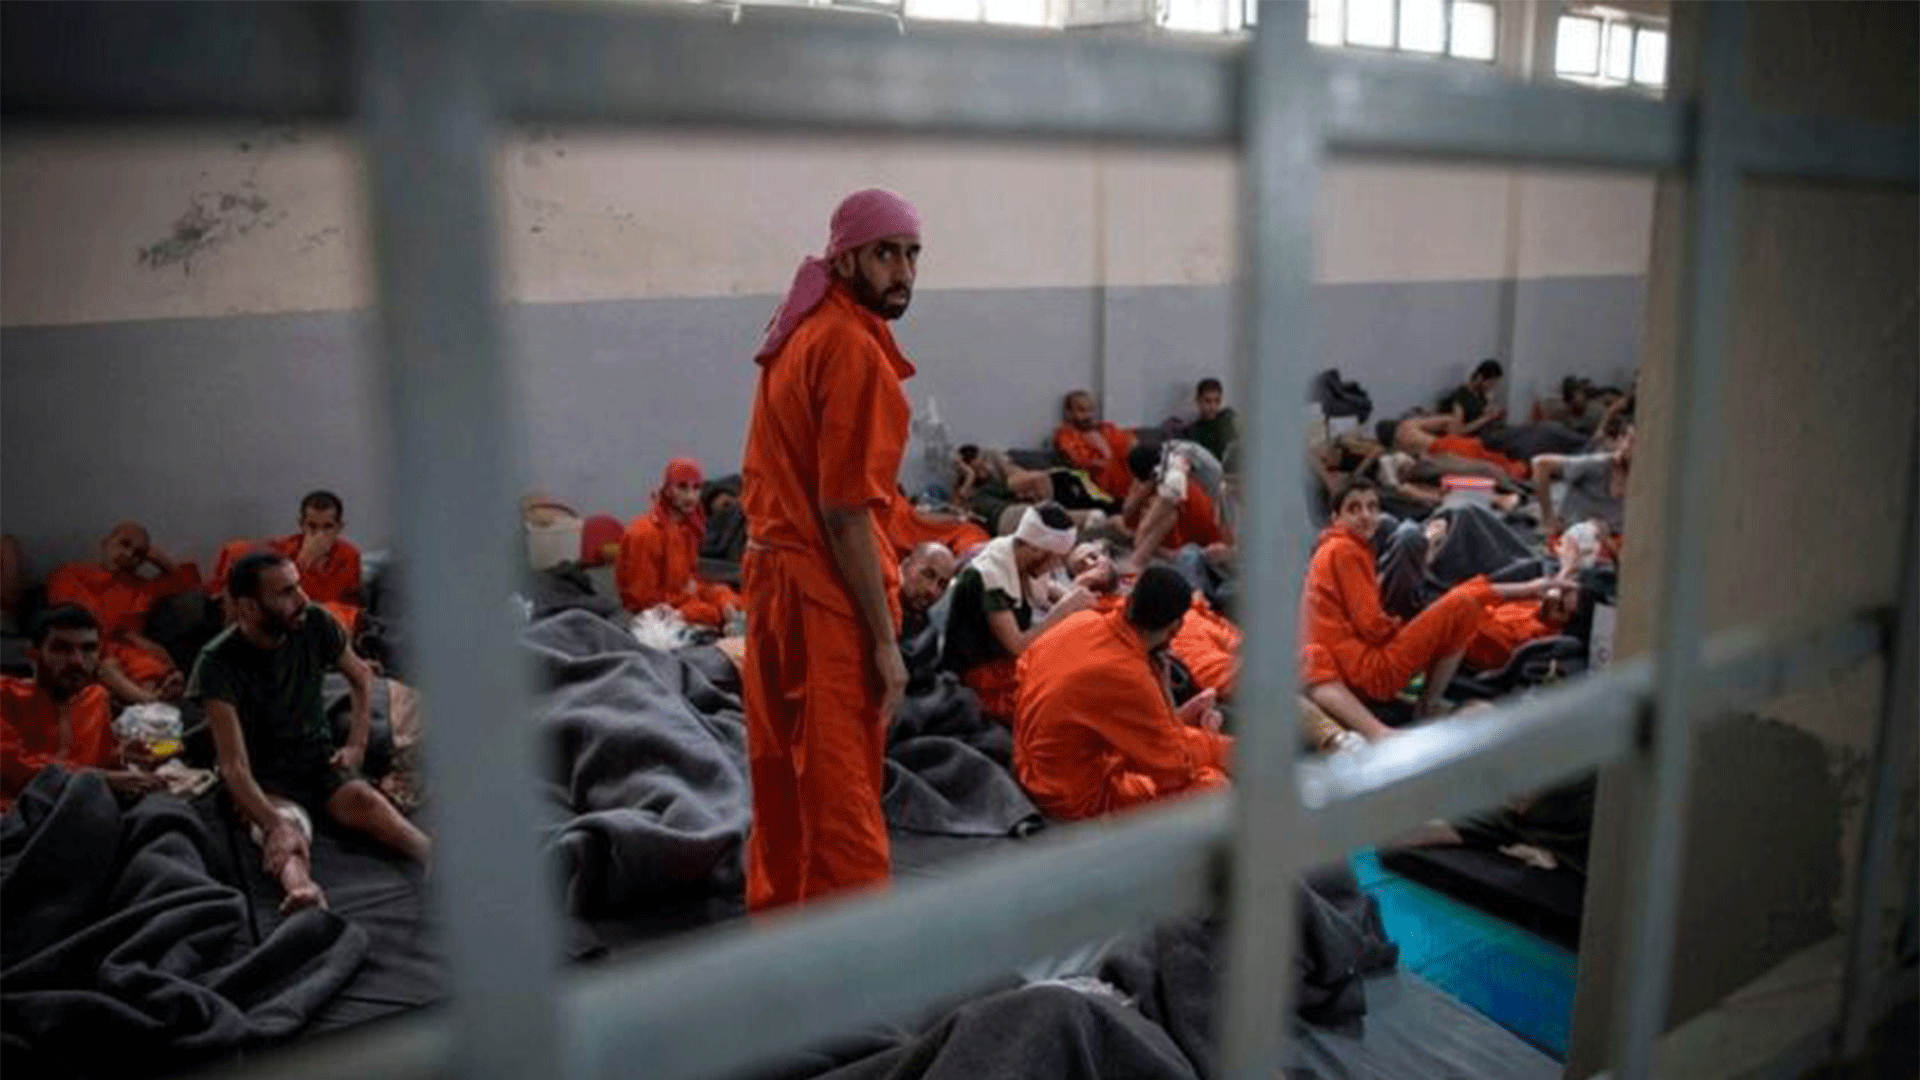  Men allegedly affiliated with the ISIS group sit on the floor in a prison in the northeastern Syrian city of al-Hasaka on Oct. 26, 2019. (Getty Images)